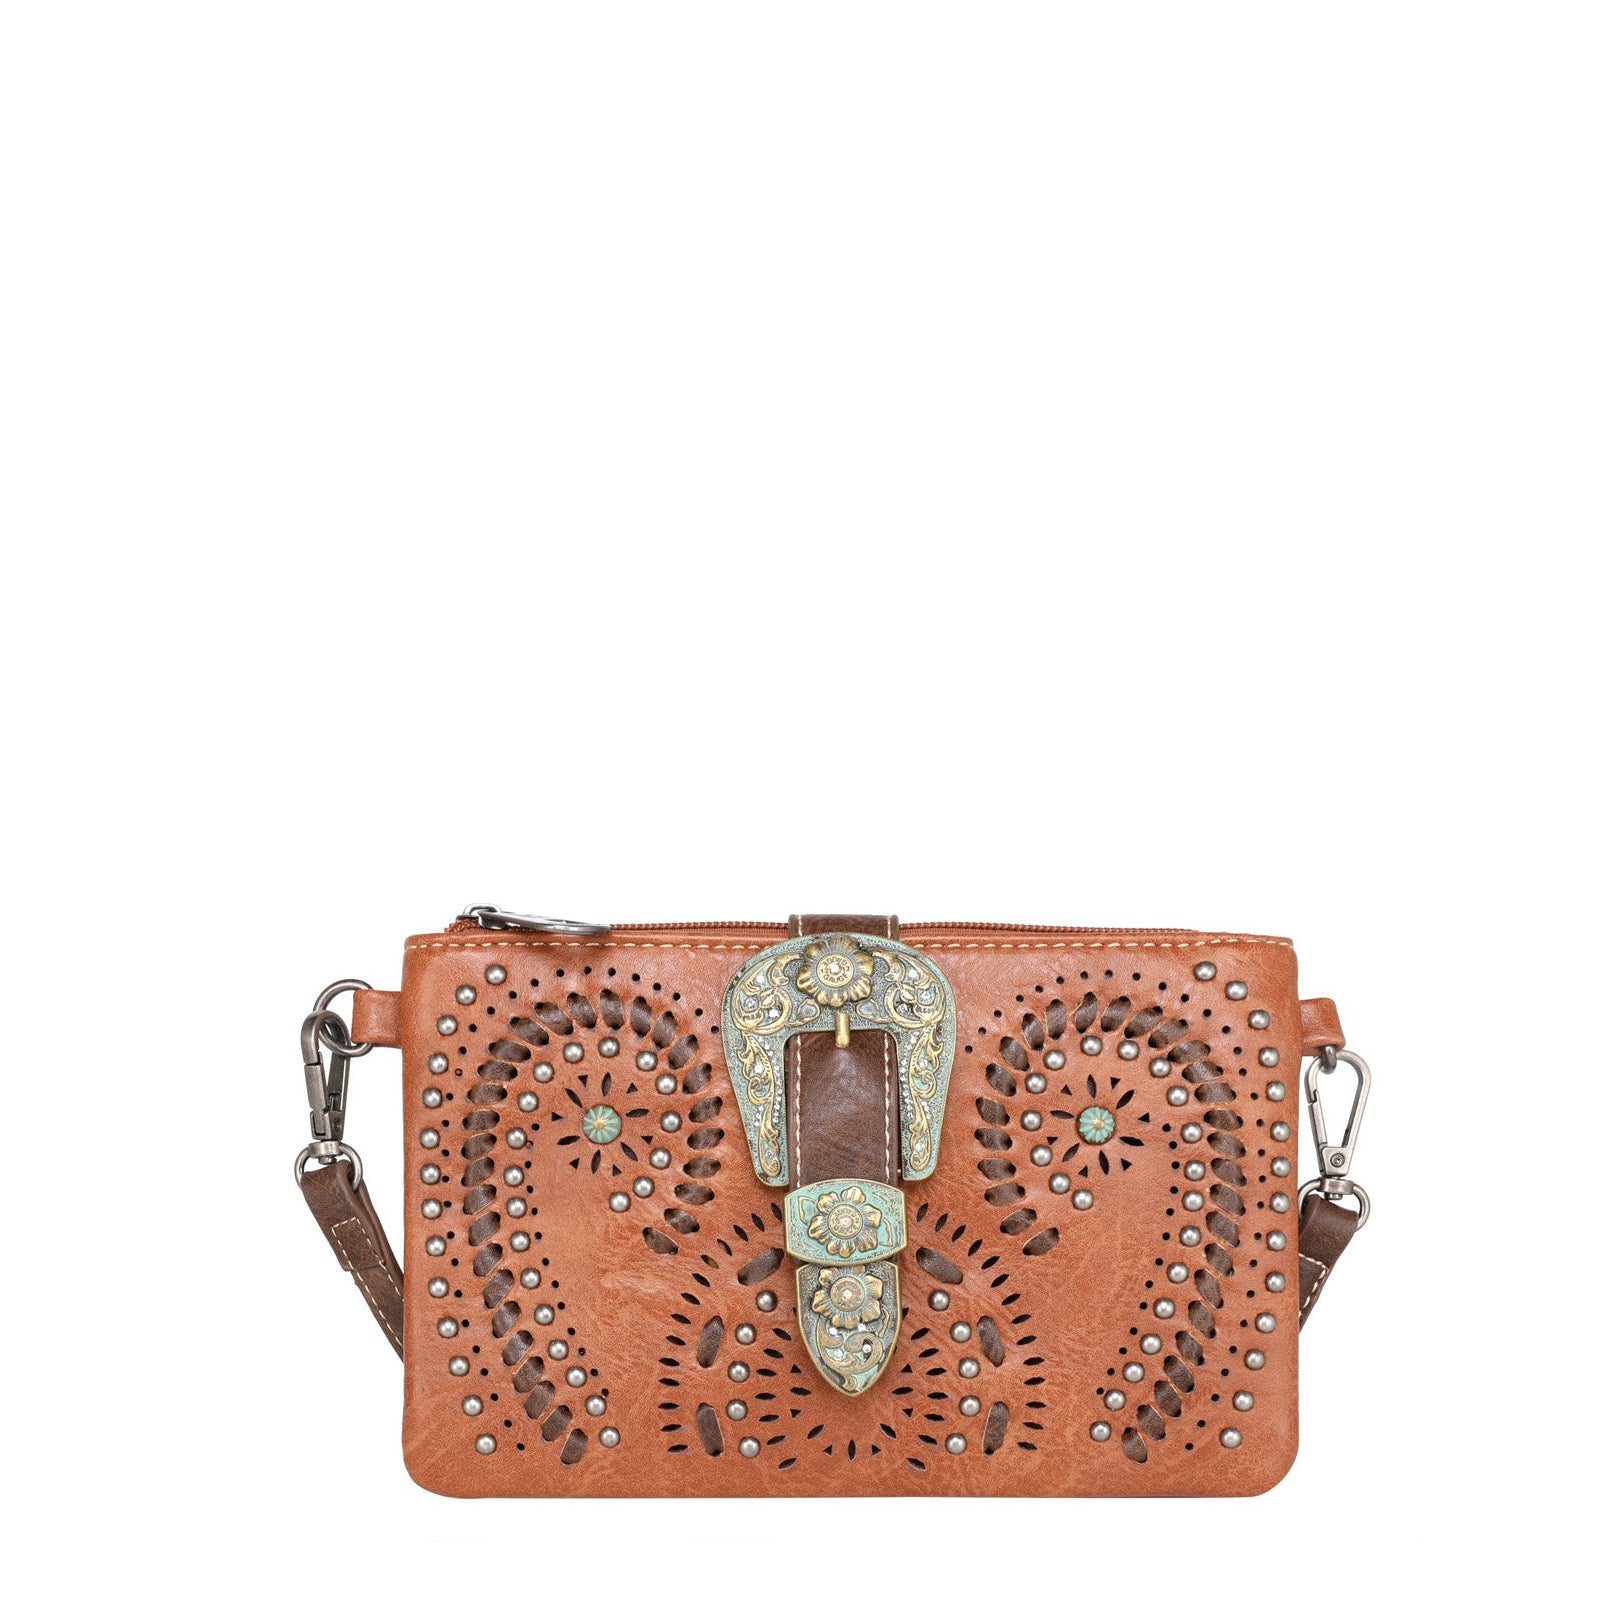 Montana West Buckle Collection Clutch/Crossbody - Cowgirl Wear